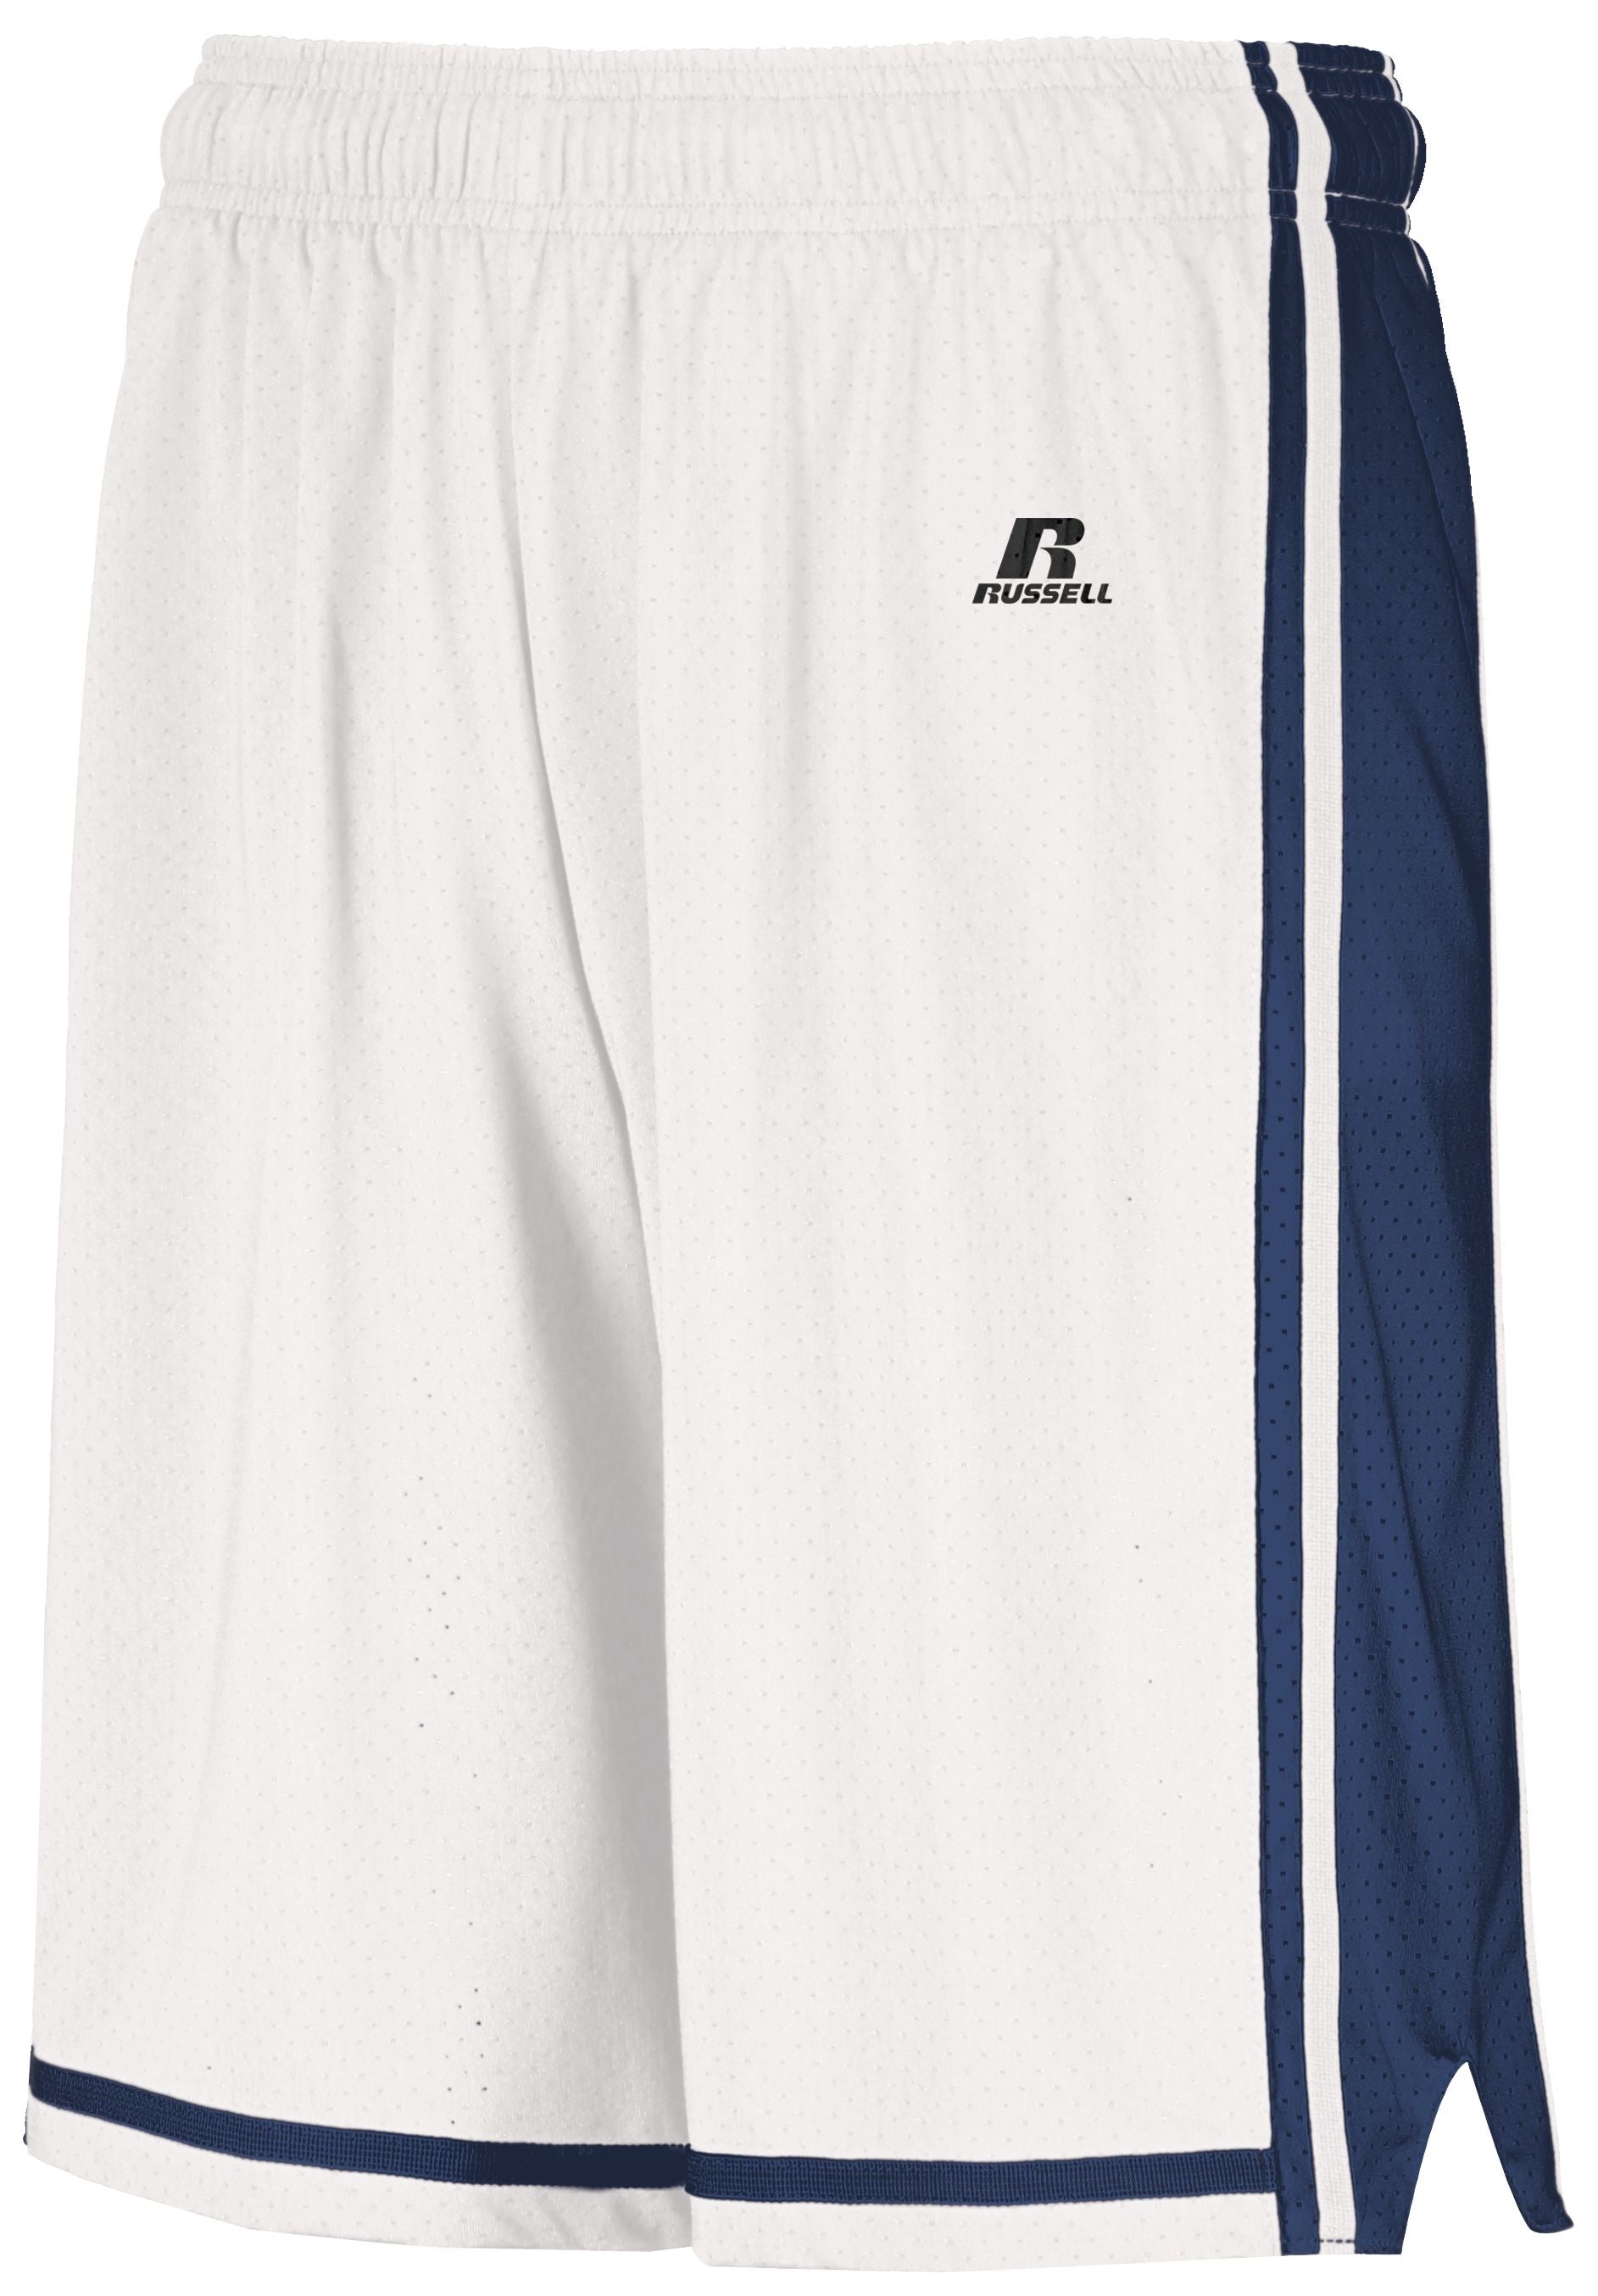 Russell Athletic Youth Legacy Basketball Shorts in White/Navy  -Part of the Youth, Youth-Shorts, Basketball, Russell-Athletic-Products, All-Sports, All-Sports-1 product lines at KanaleyCreations.com